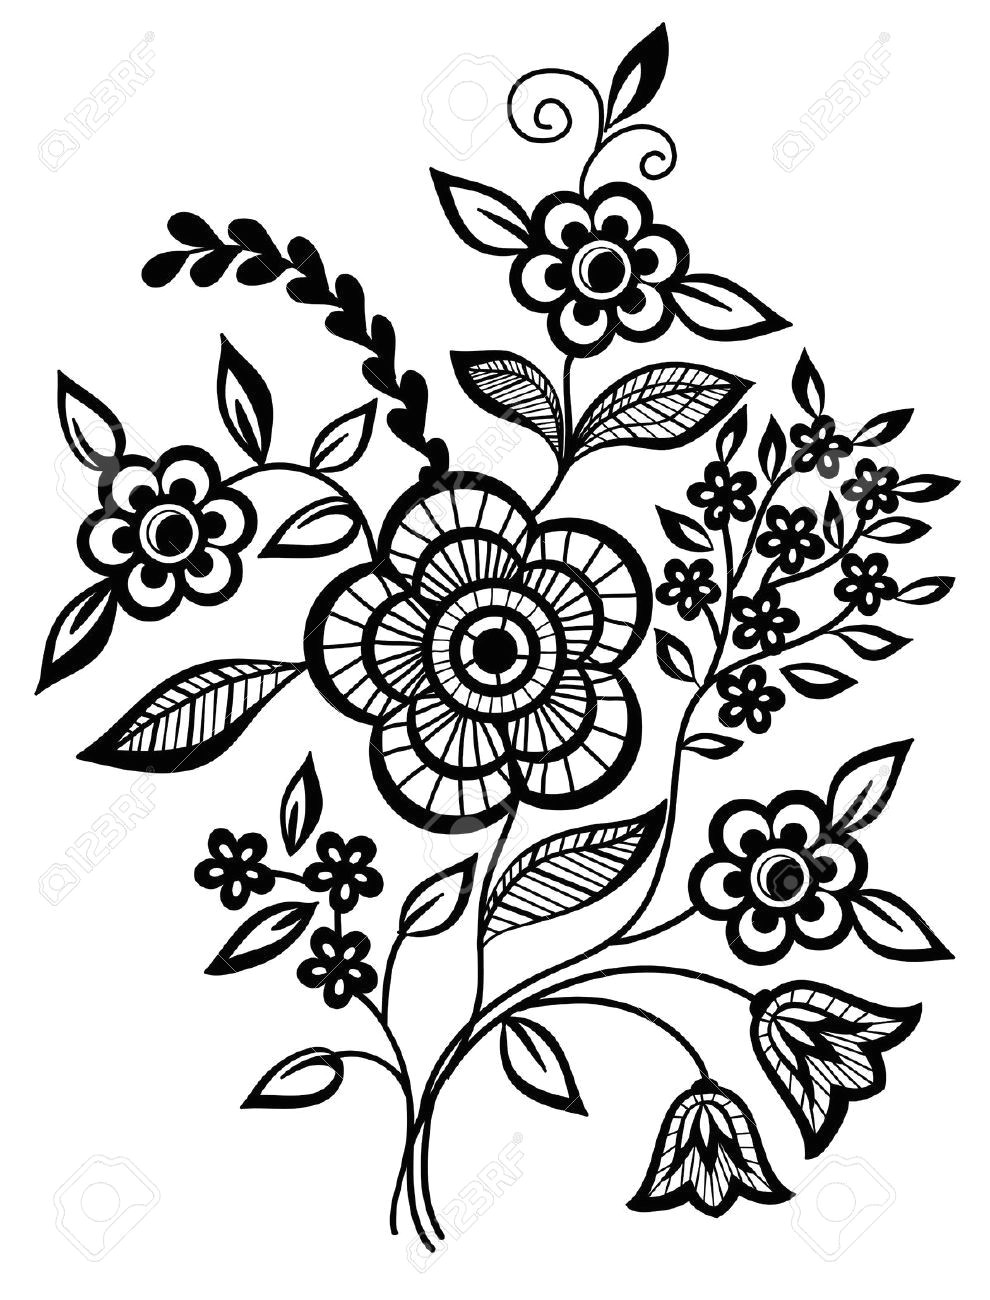 Drawings Of Flower Patterns Black and White Flowers and Leaves Design Element Mandalas Adult